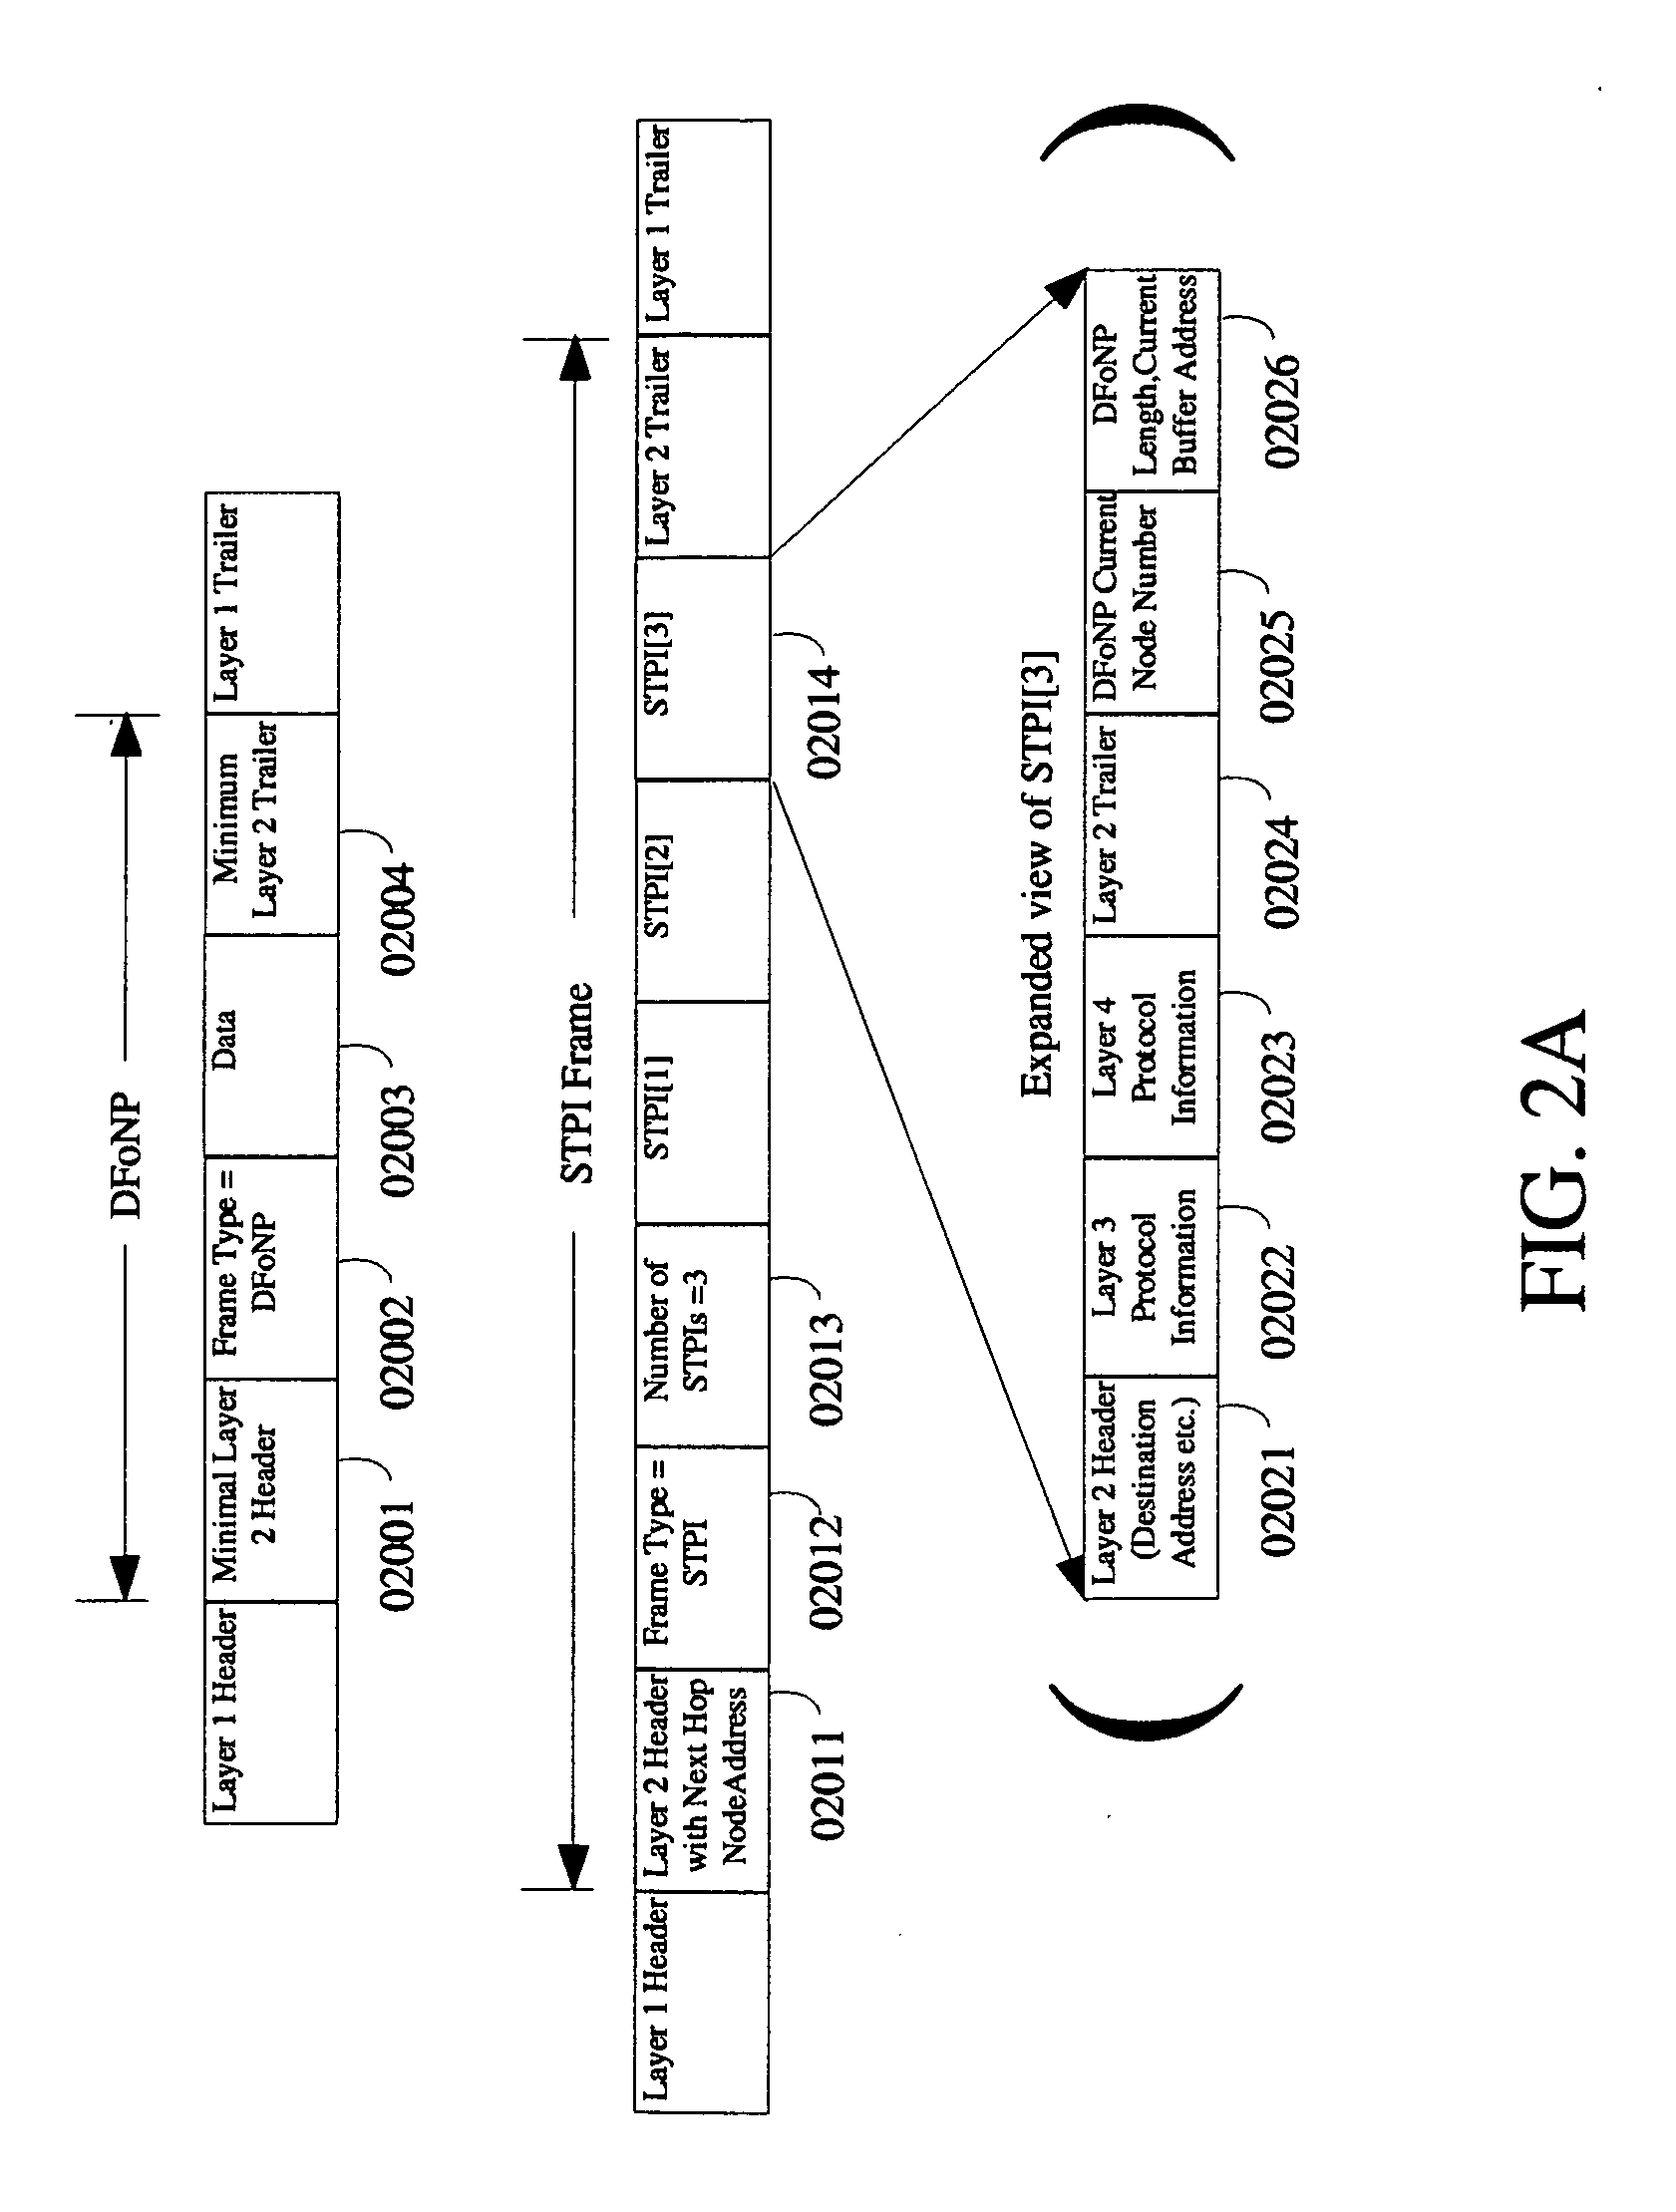 Creation and transmission of part of protocol information corresponding to network packets or datalink frames separately